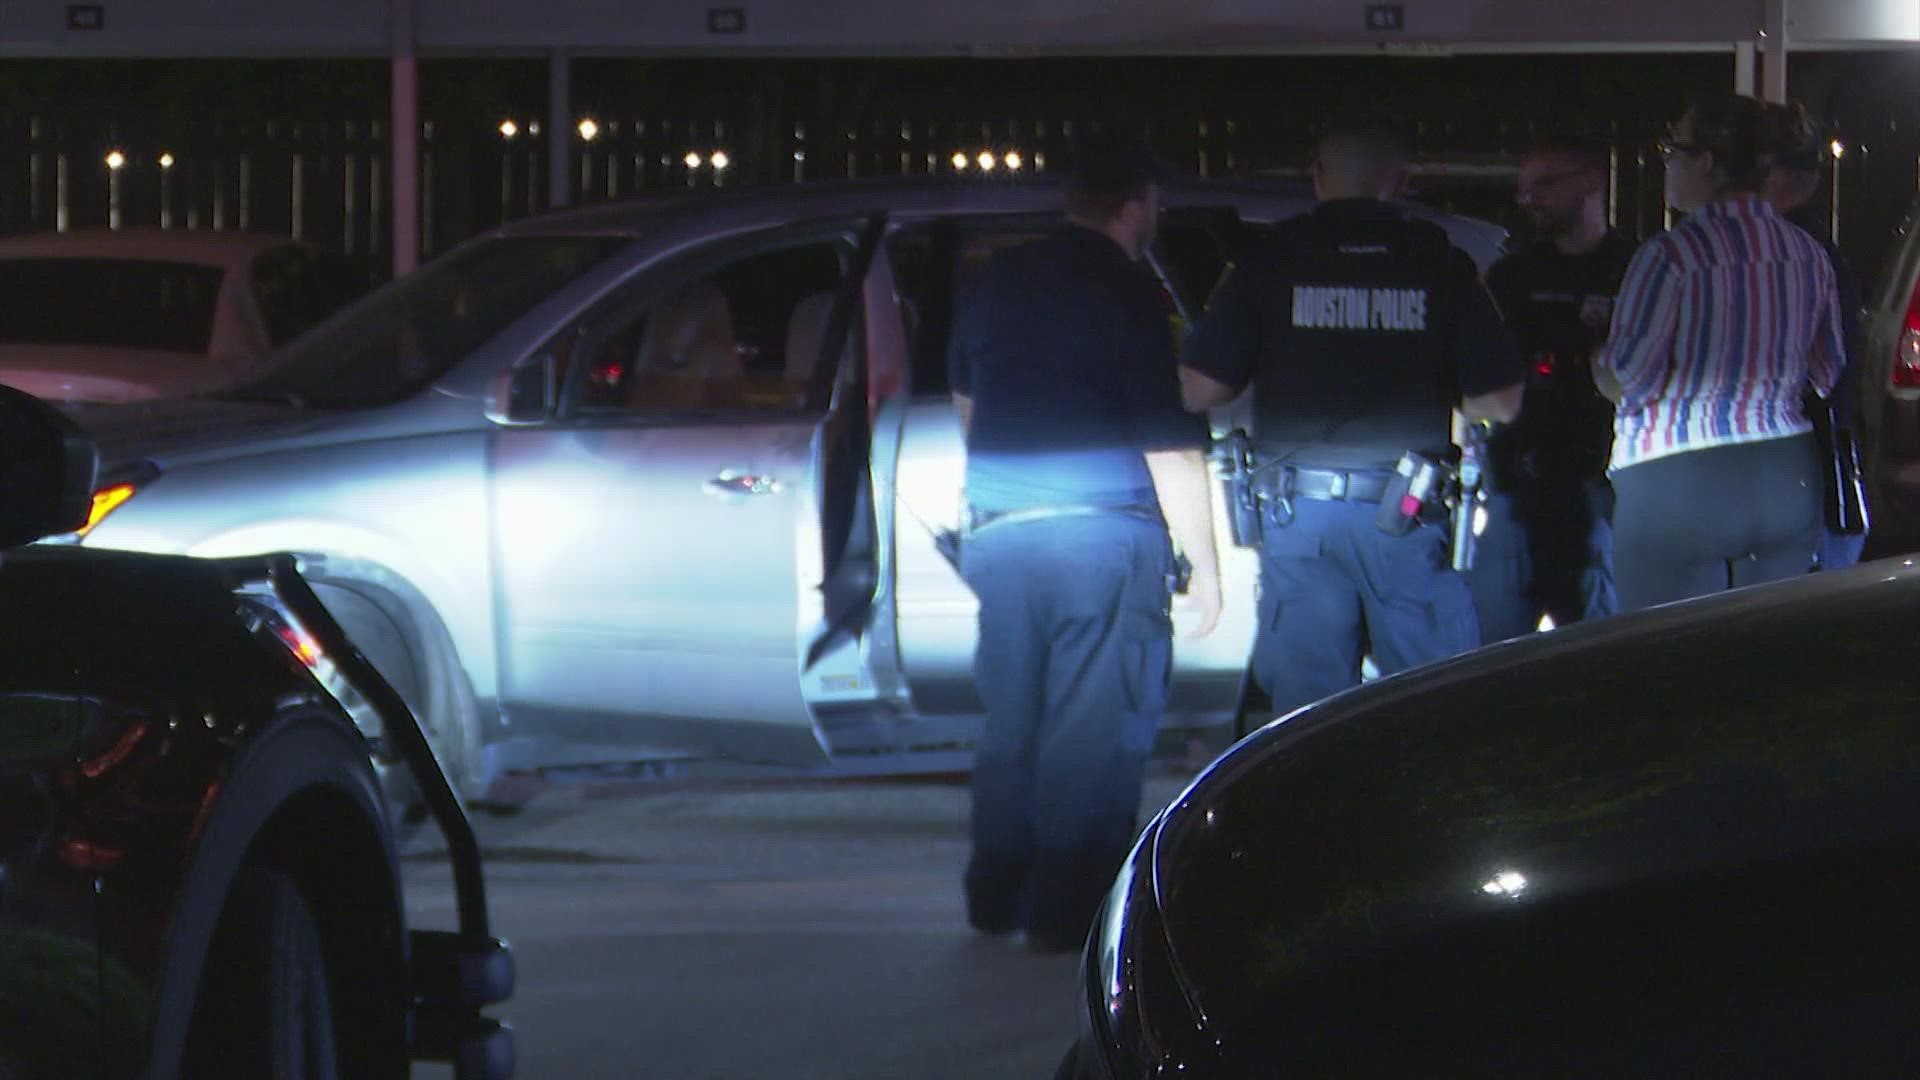 Houston police on Thursday night recovered a stolen vehicle where a 7-month-old baby was found inside.